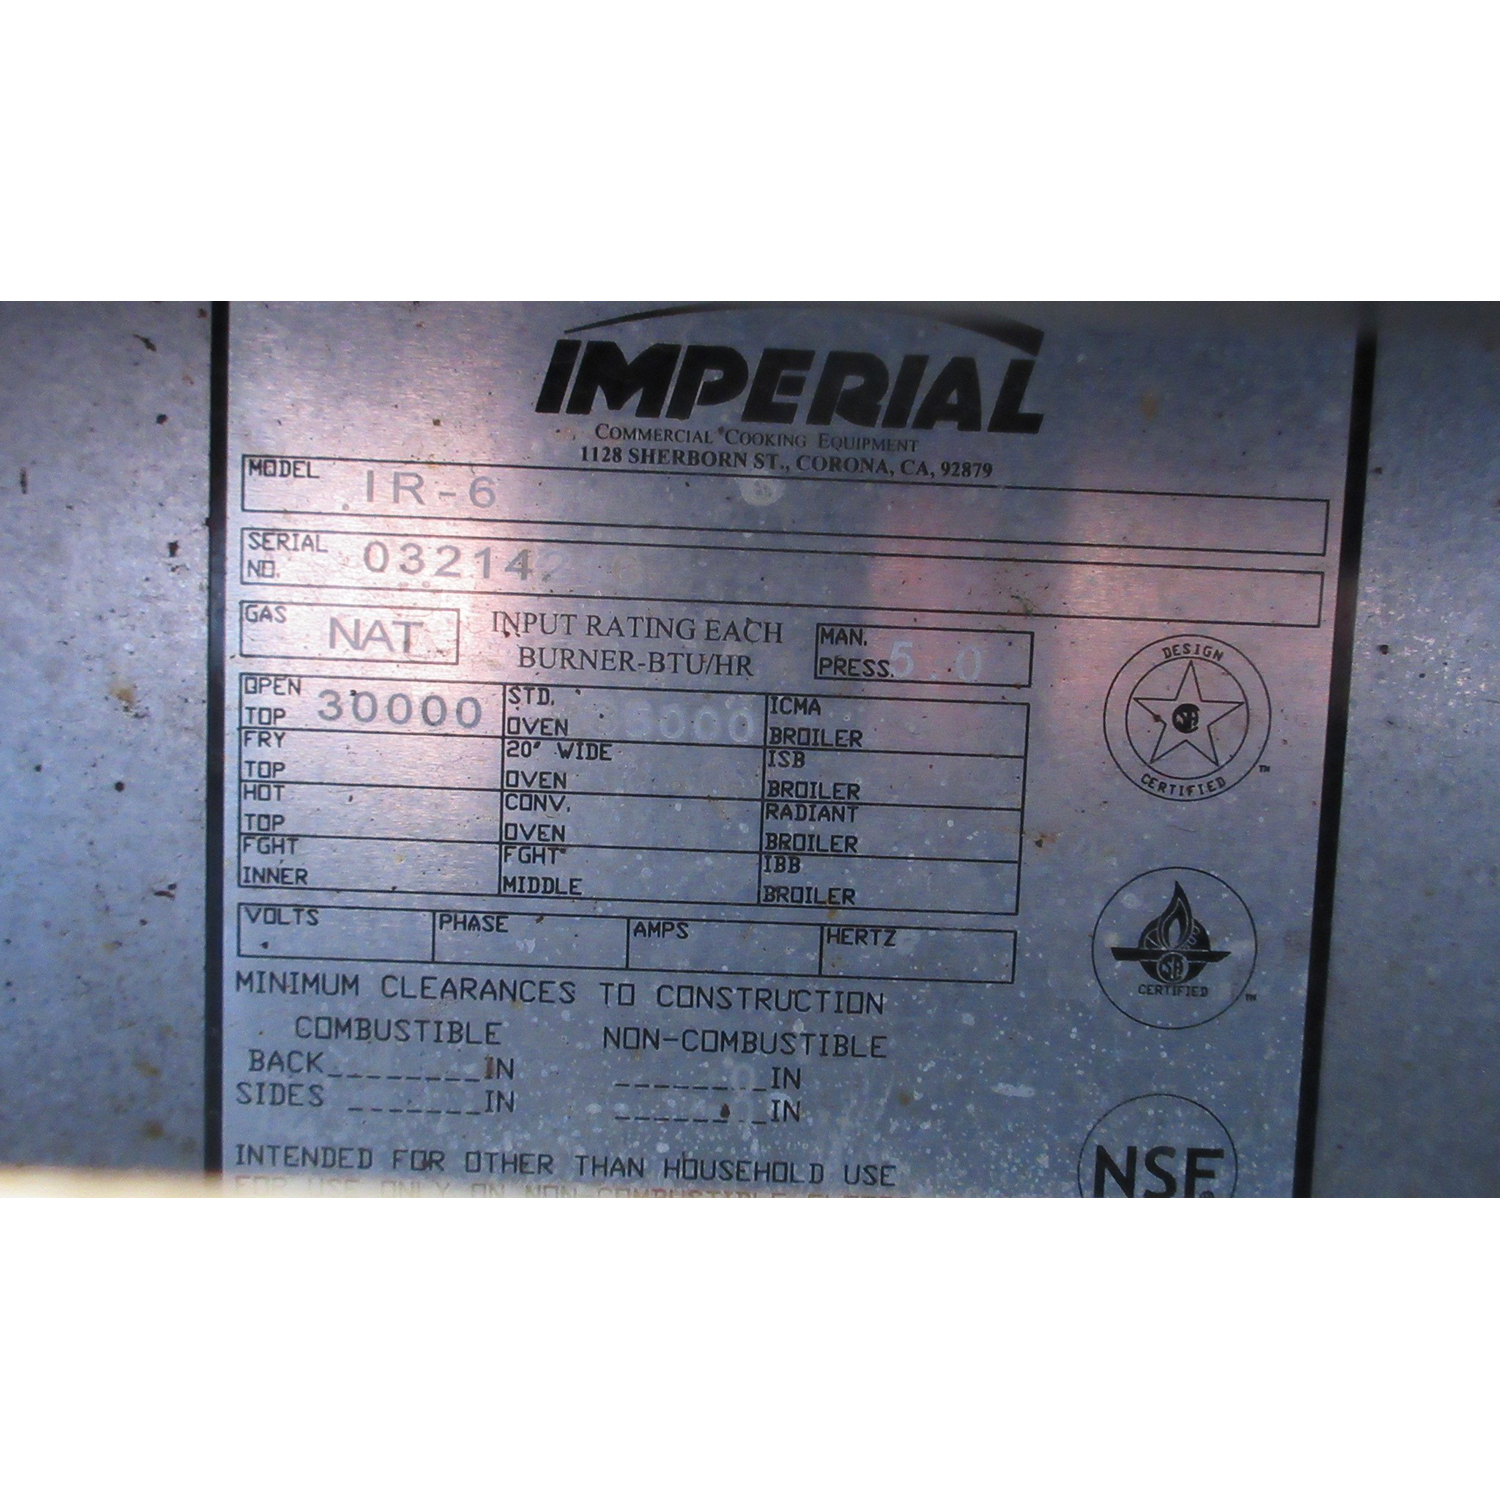 Imperial IR-6-IRSB 6 Burner Range with Salamander Broiler, Gas, Used Excellent Condition image 6